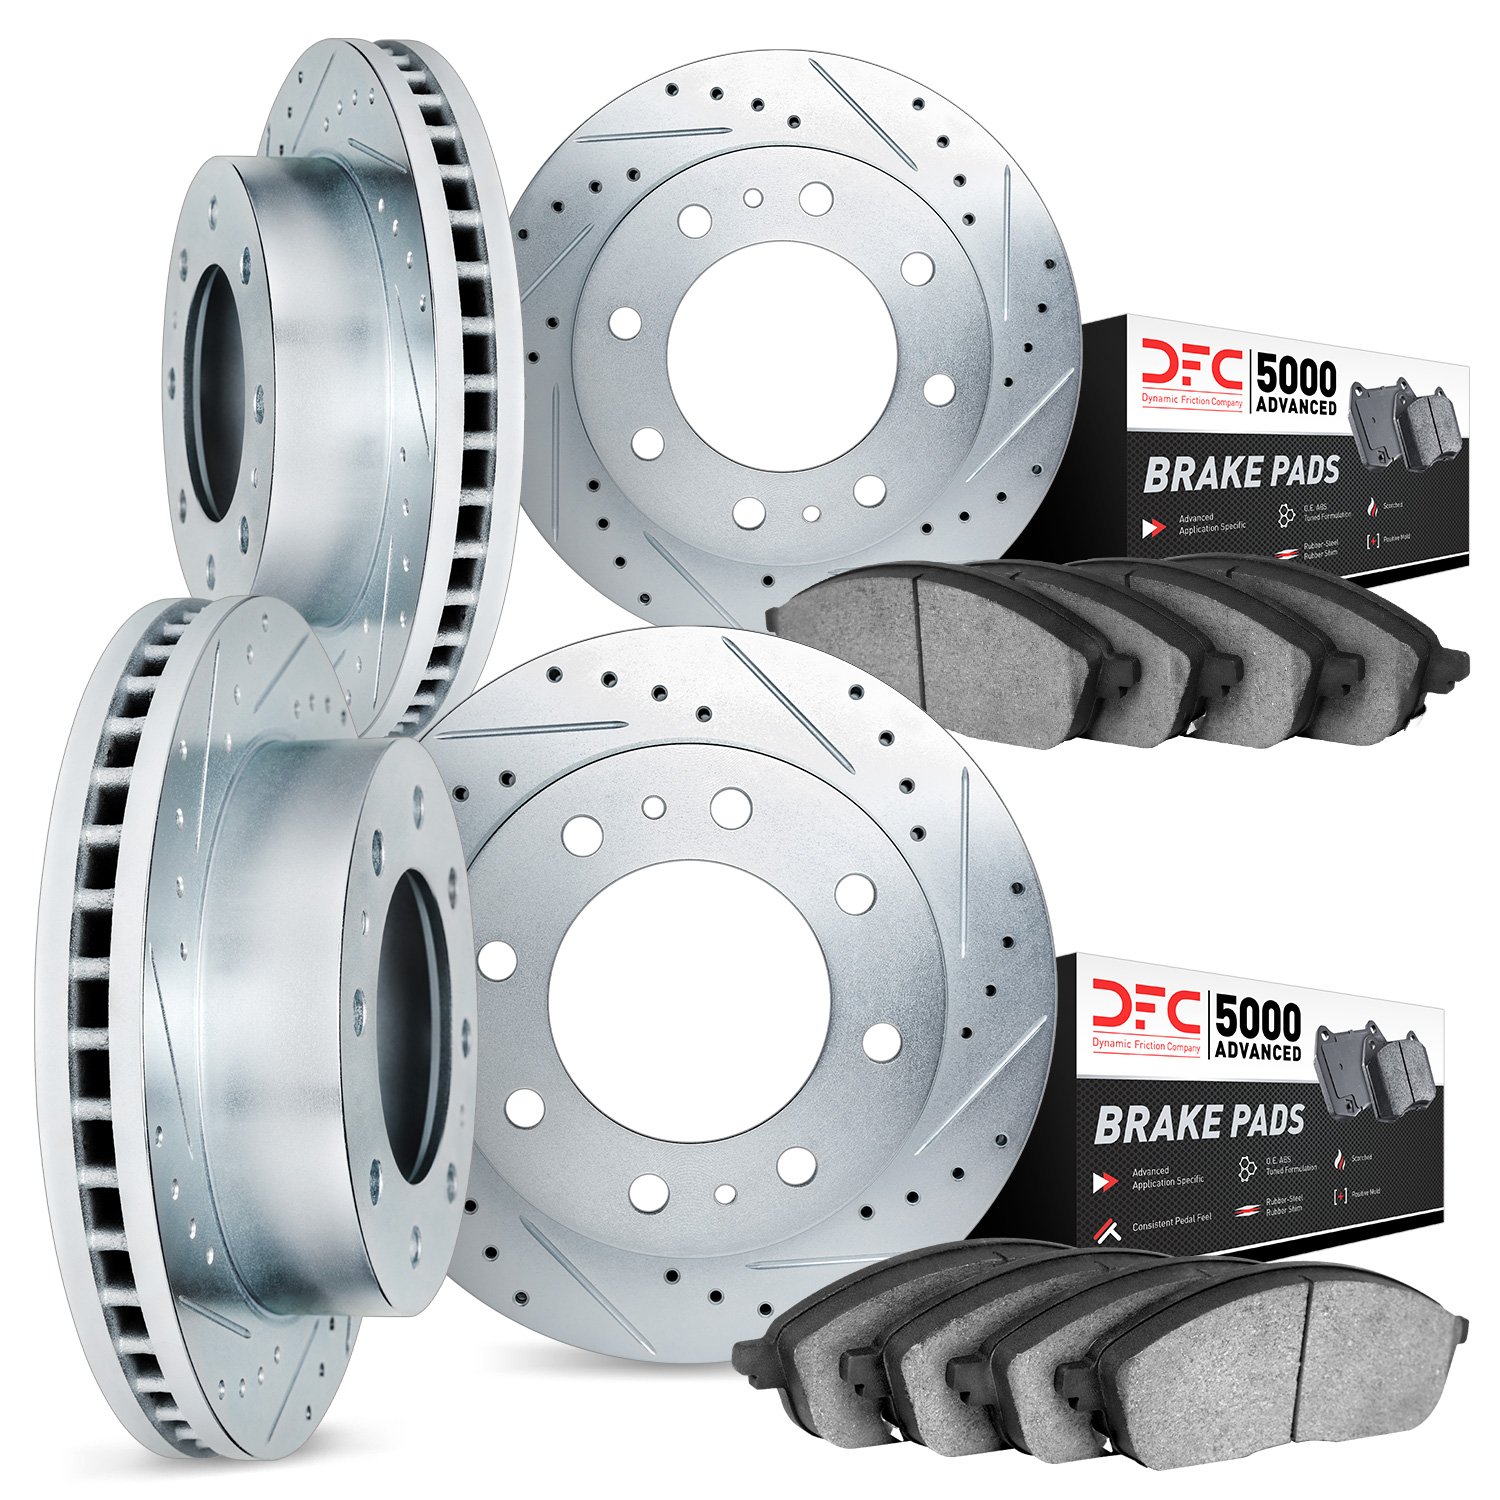 7504-48049 Drilled/Slotted Brake Rotors w/5000 Advanced Brake Pads Kit [Silver], Fits Select GM, Position: Front and Rear